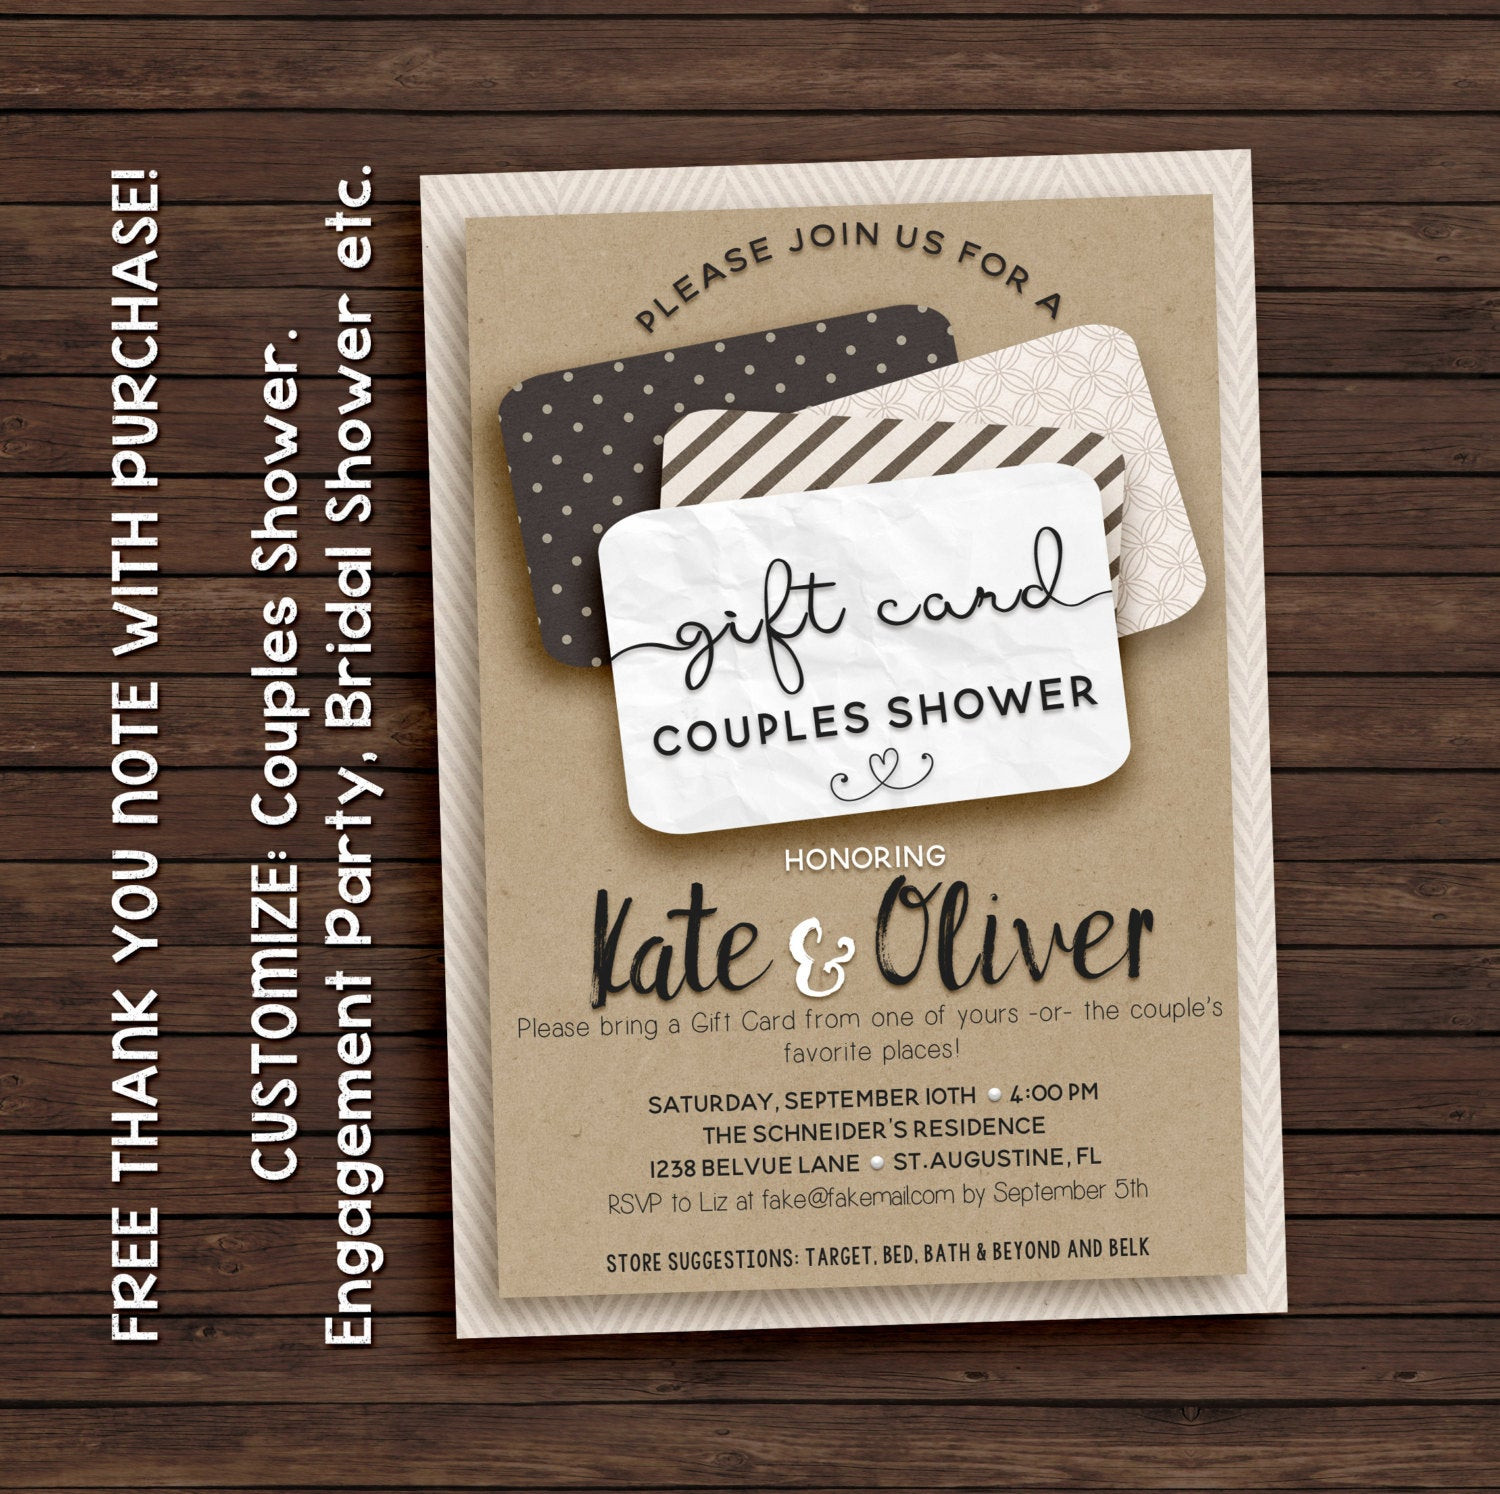 Gift Card Ideas For Couples
 Couples shower invitation t card invitation printable